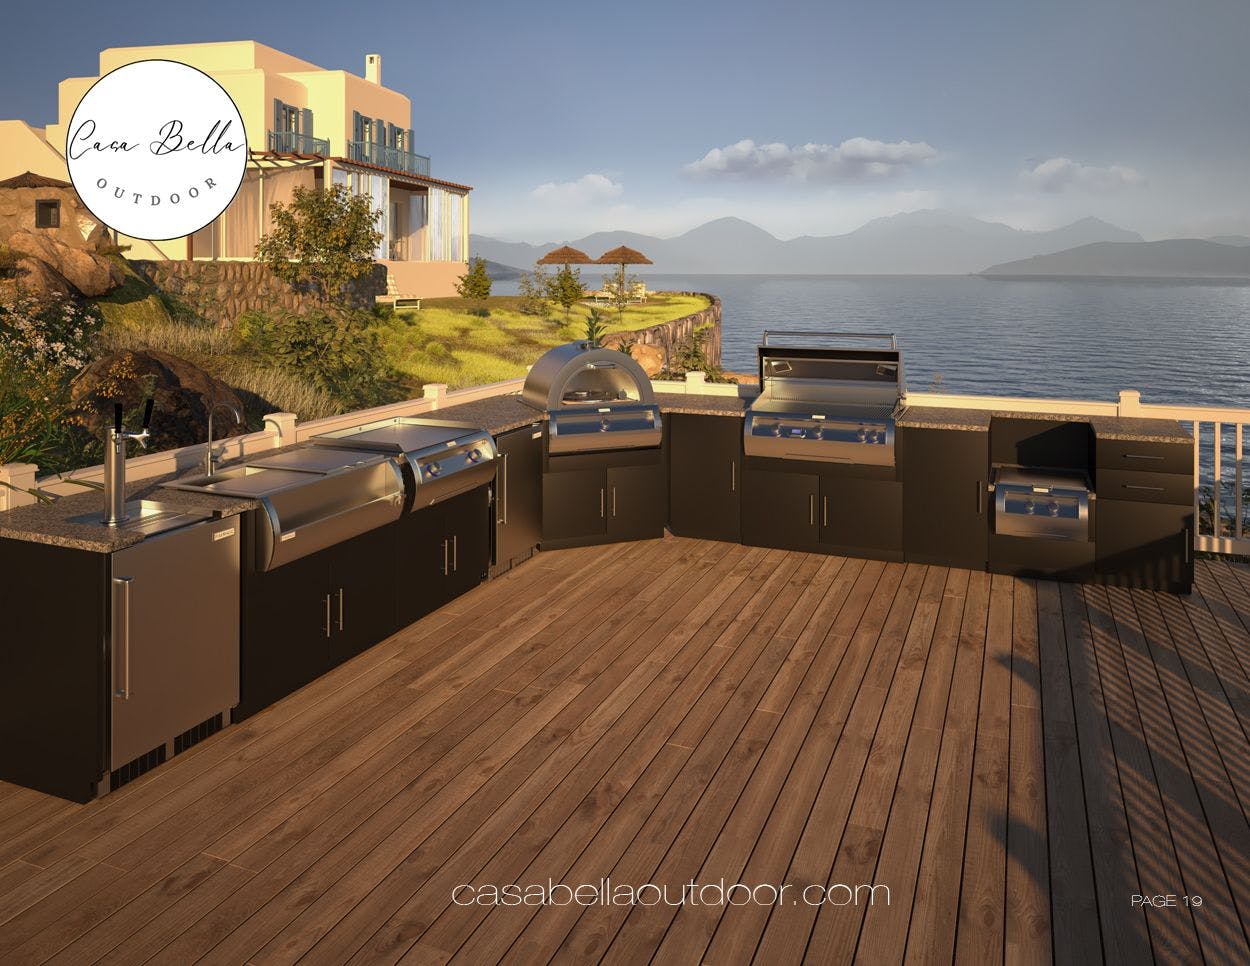 How much does an outdoor kitchen add to home value - The Value-Boosting Benefits of an Outdoor Kitchen for Your Home